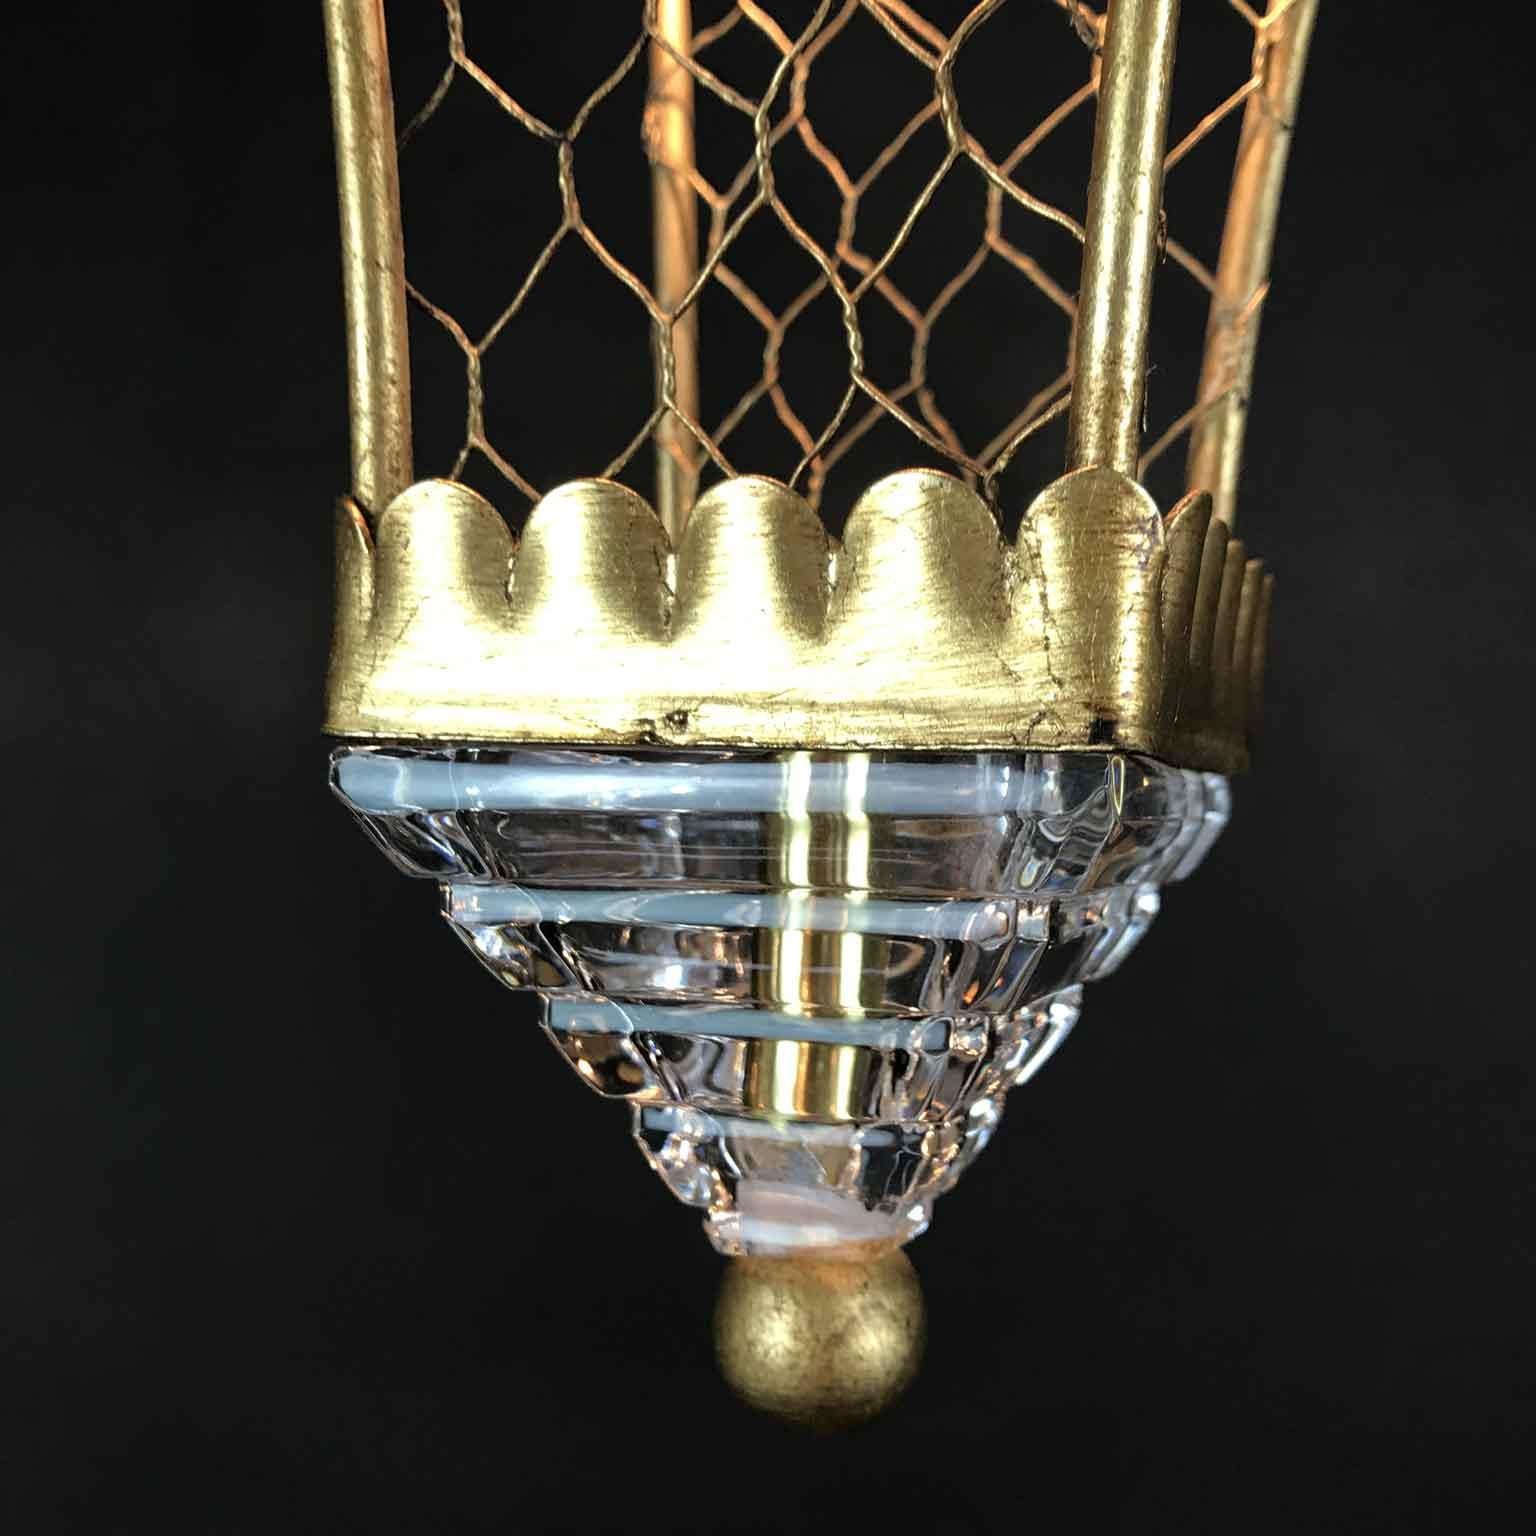 20th Century Florentine Pagoda Pendant by Banci Italian Gilded Lantern with Crystals 1990s For Sale